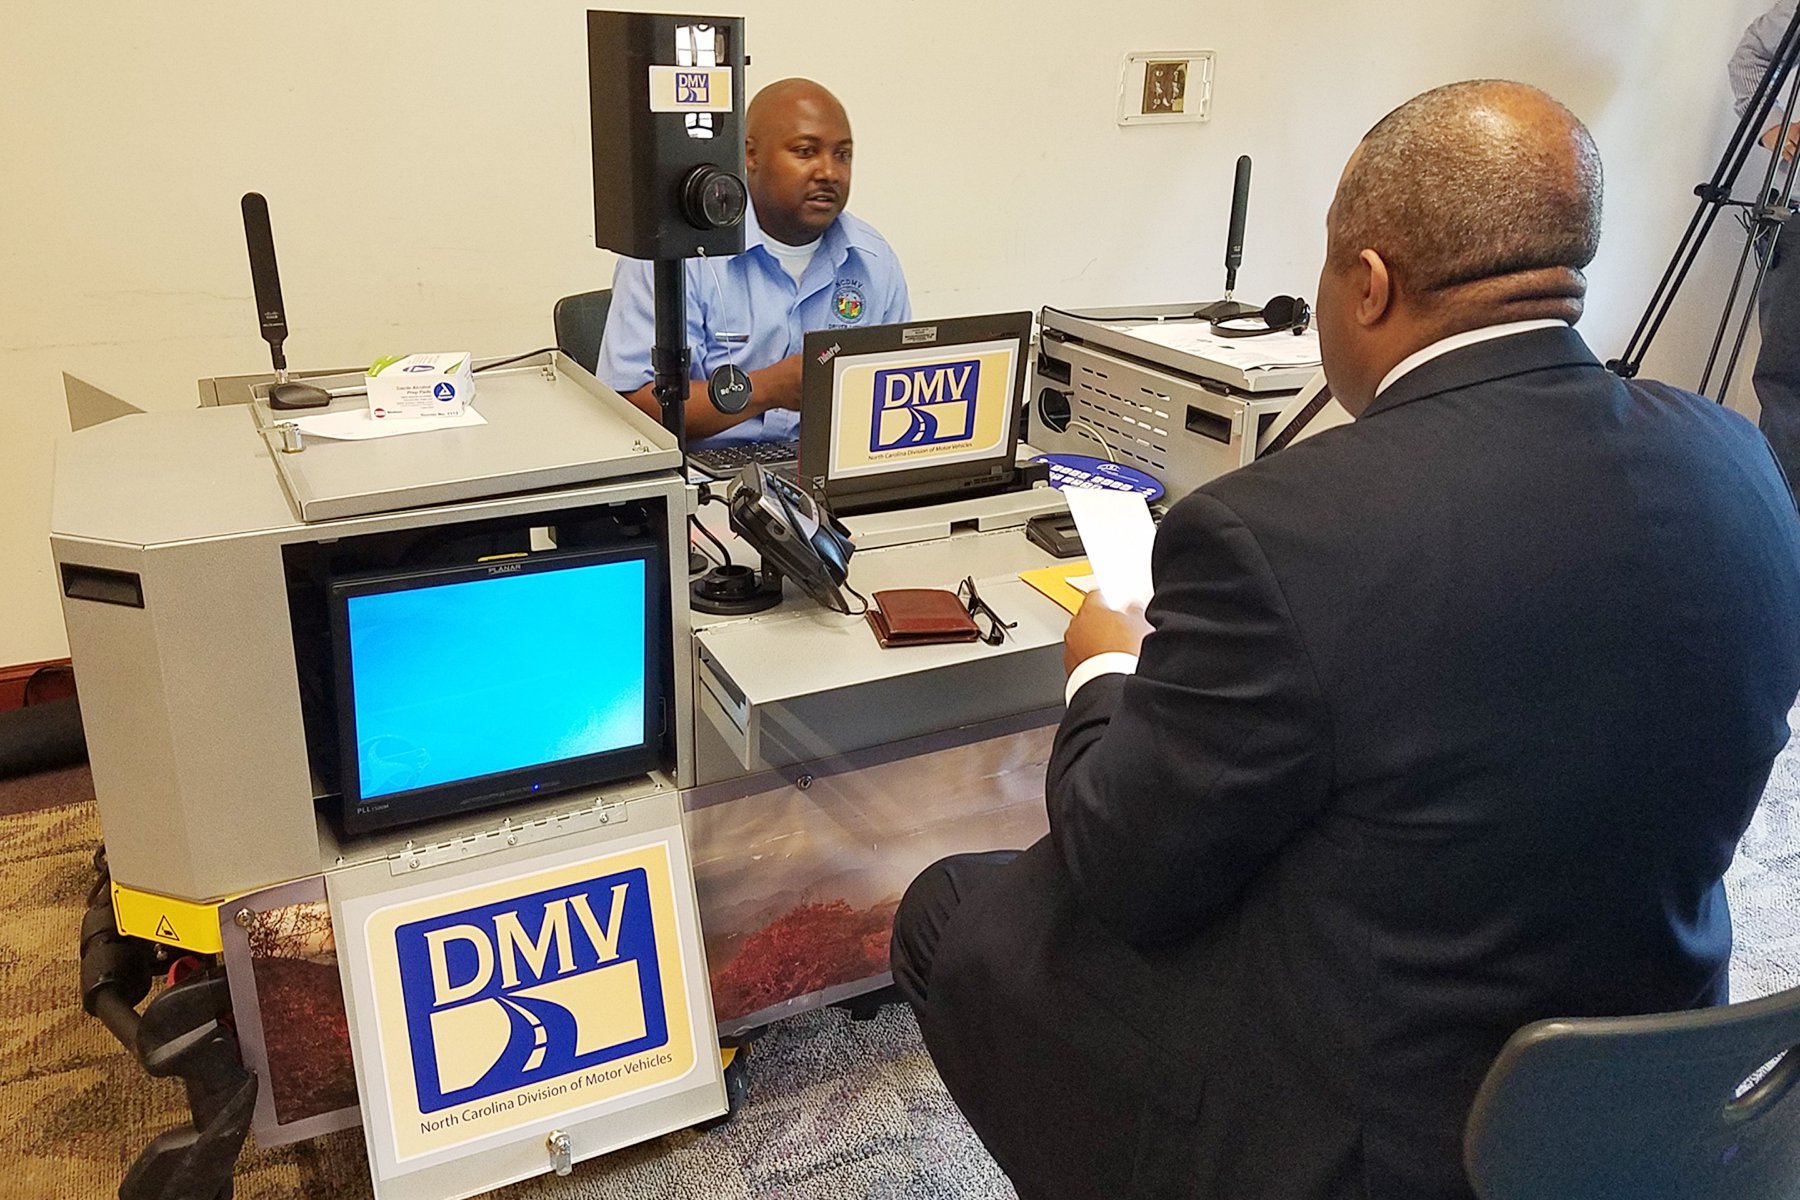 52 New Driver License Examiners to Help Improve Customer Service at DMV